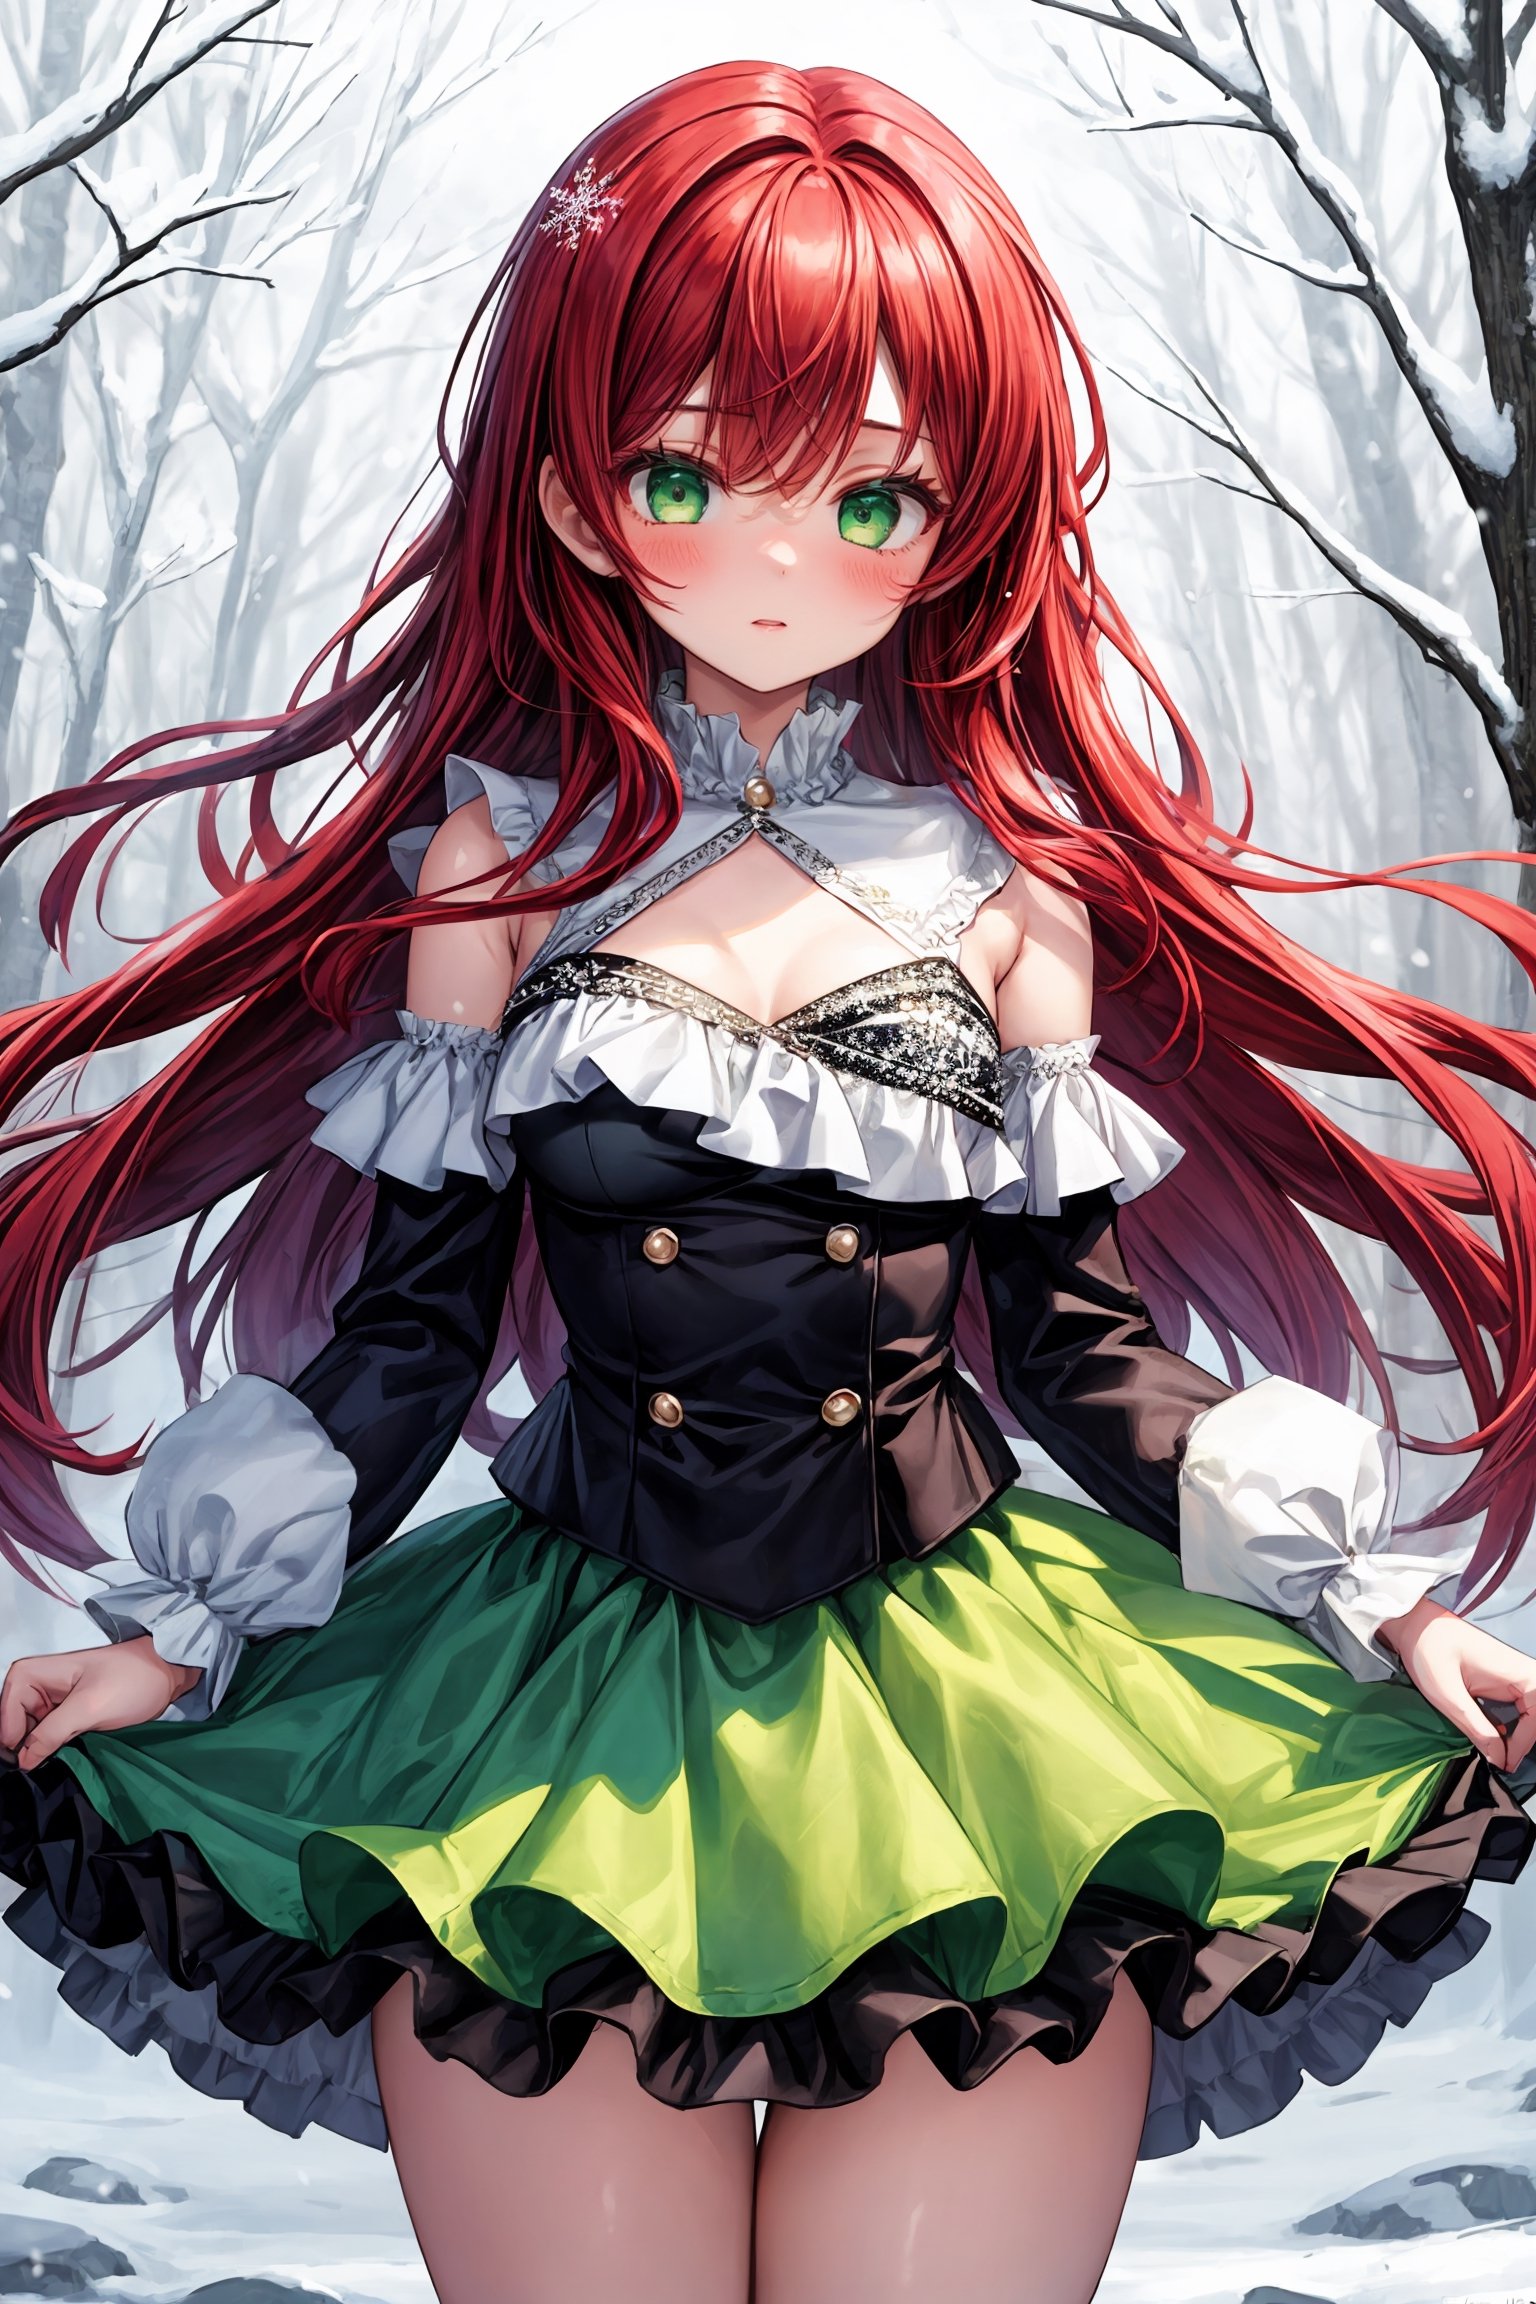 1 girl, red hair, mid-length hair, fit curvy body, medium breasts, pearl real green eyes, ((ruffled top)), (( tutu skirt)), snowy forest cenary full background, snow flakes falling 